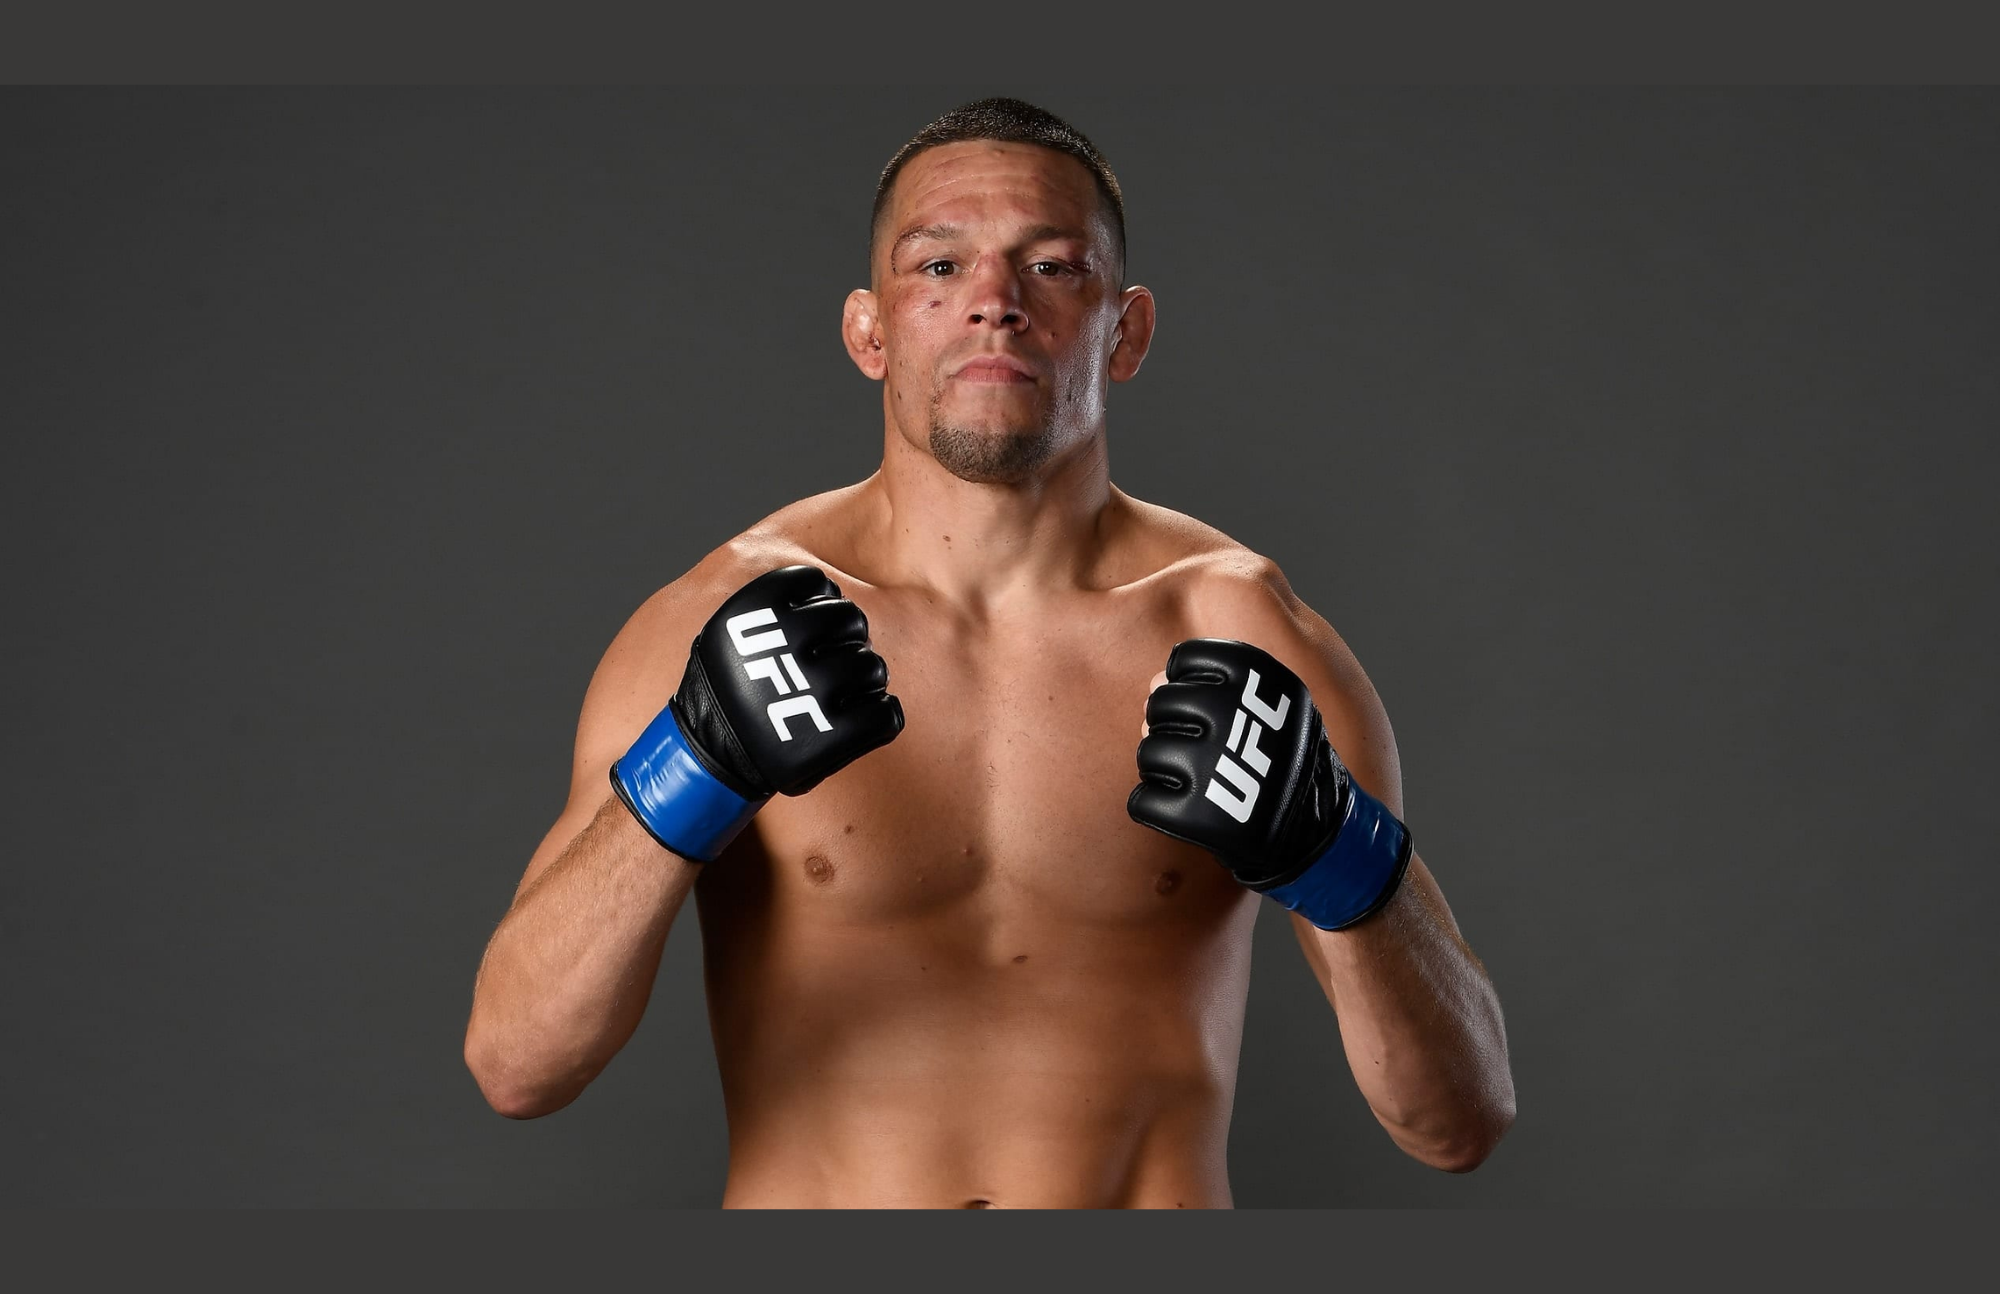 Nate Diaz Net Worth In 2022 - The Man Who Shocked The UFC World